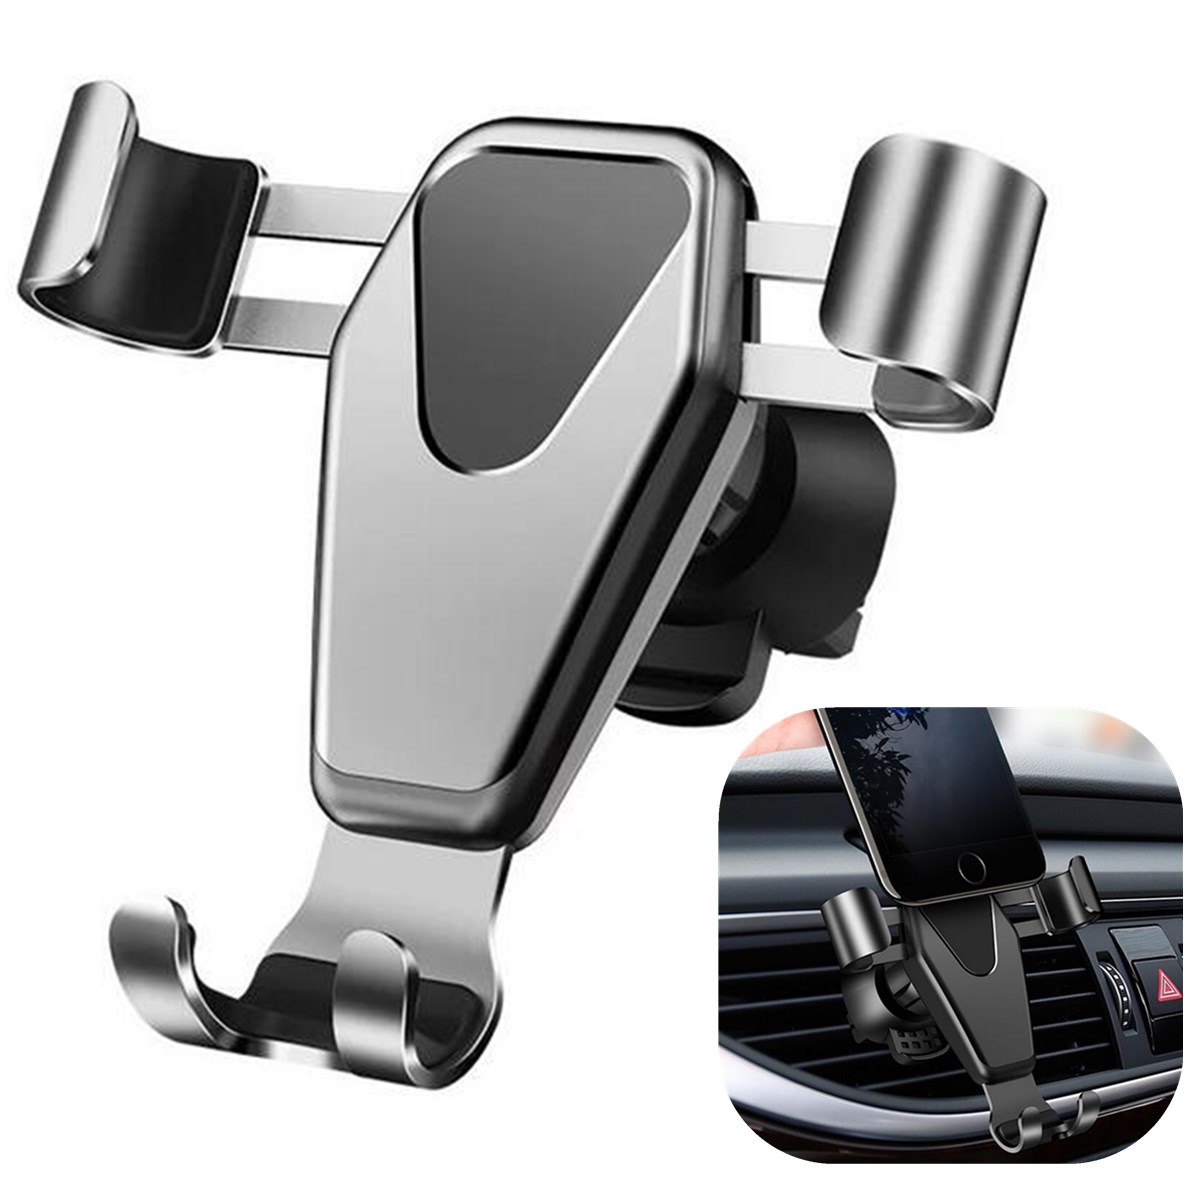 

Gravity Linkage Automatical Lock 360° Rotation Car Mount Air Vent Holder for Xiaomi Mobile Phone 4.0 - 6.0"